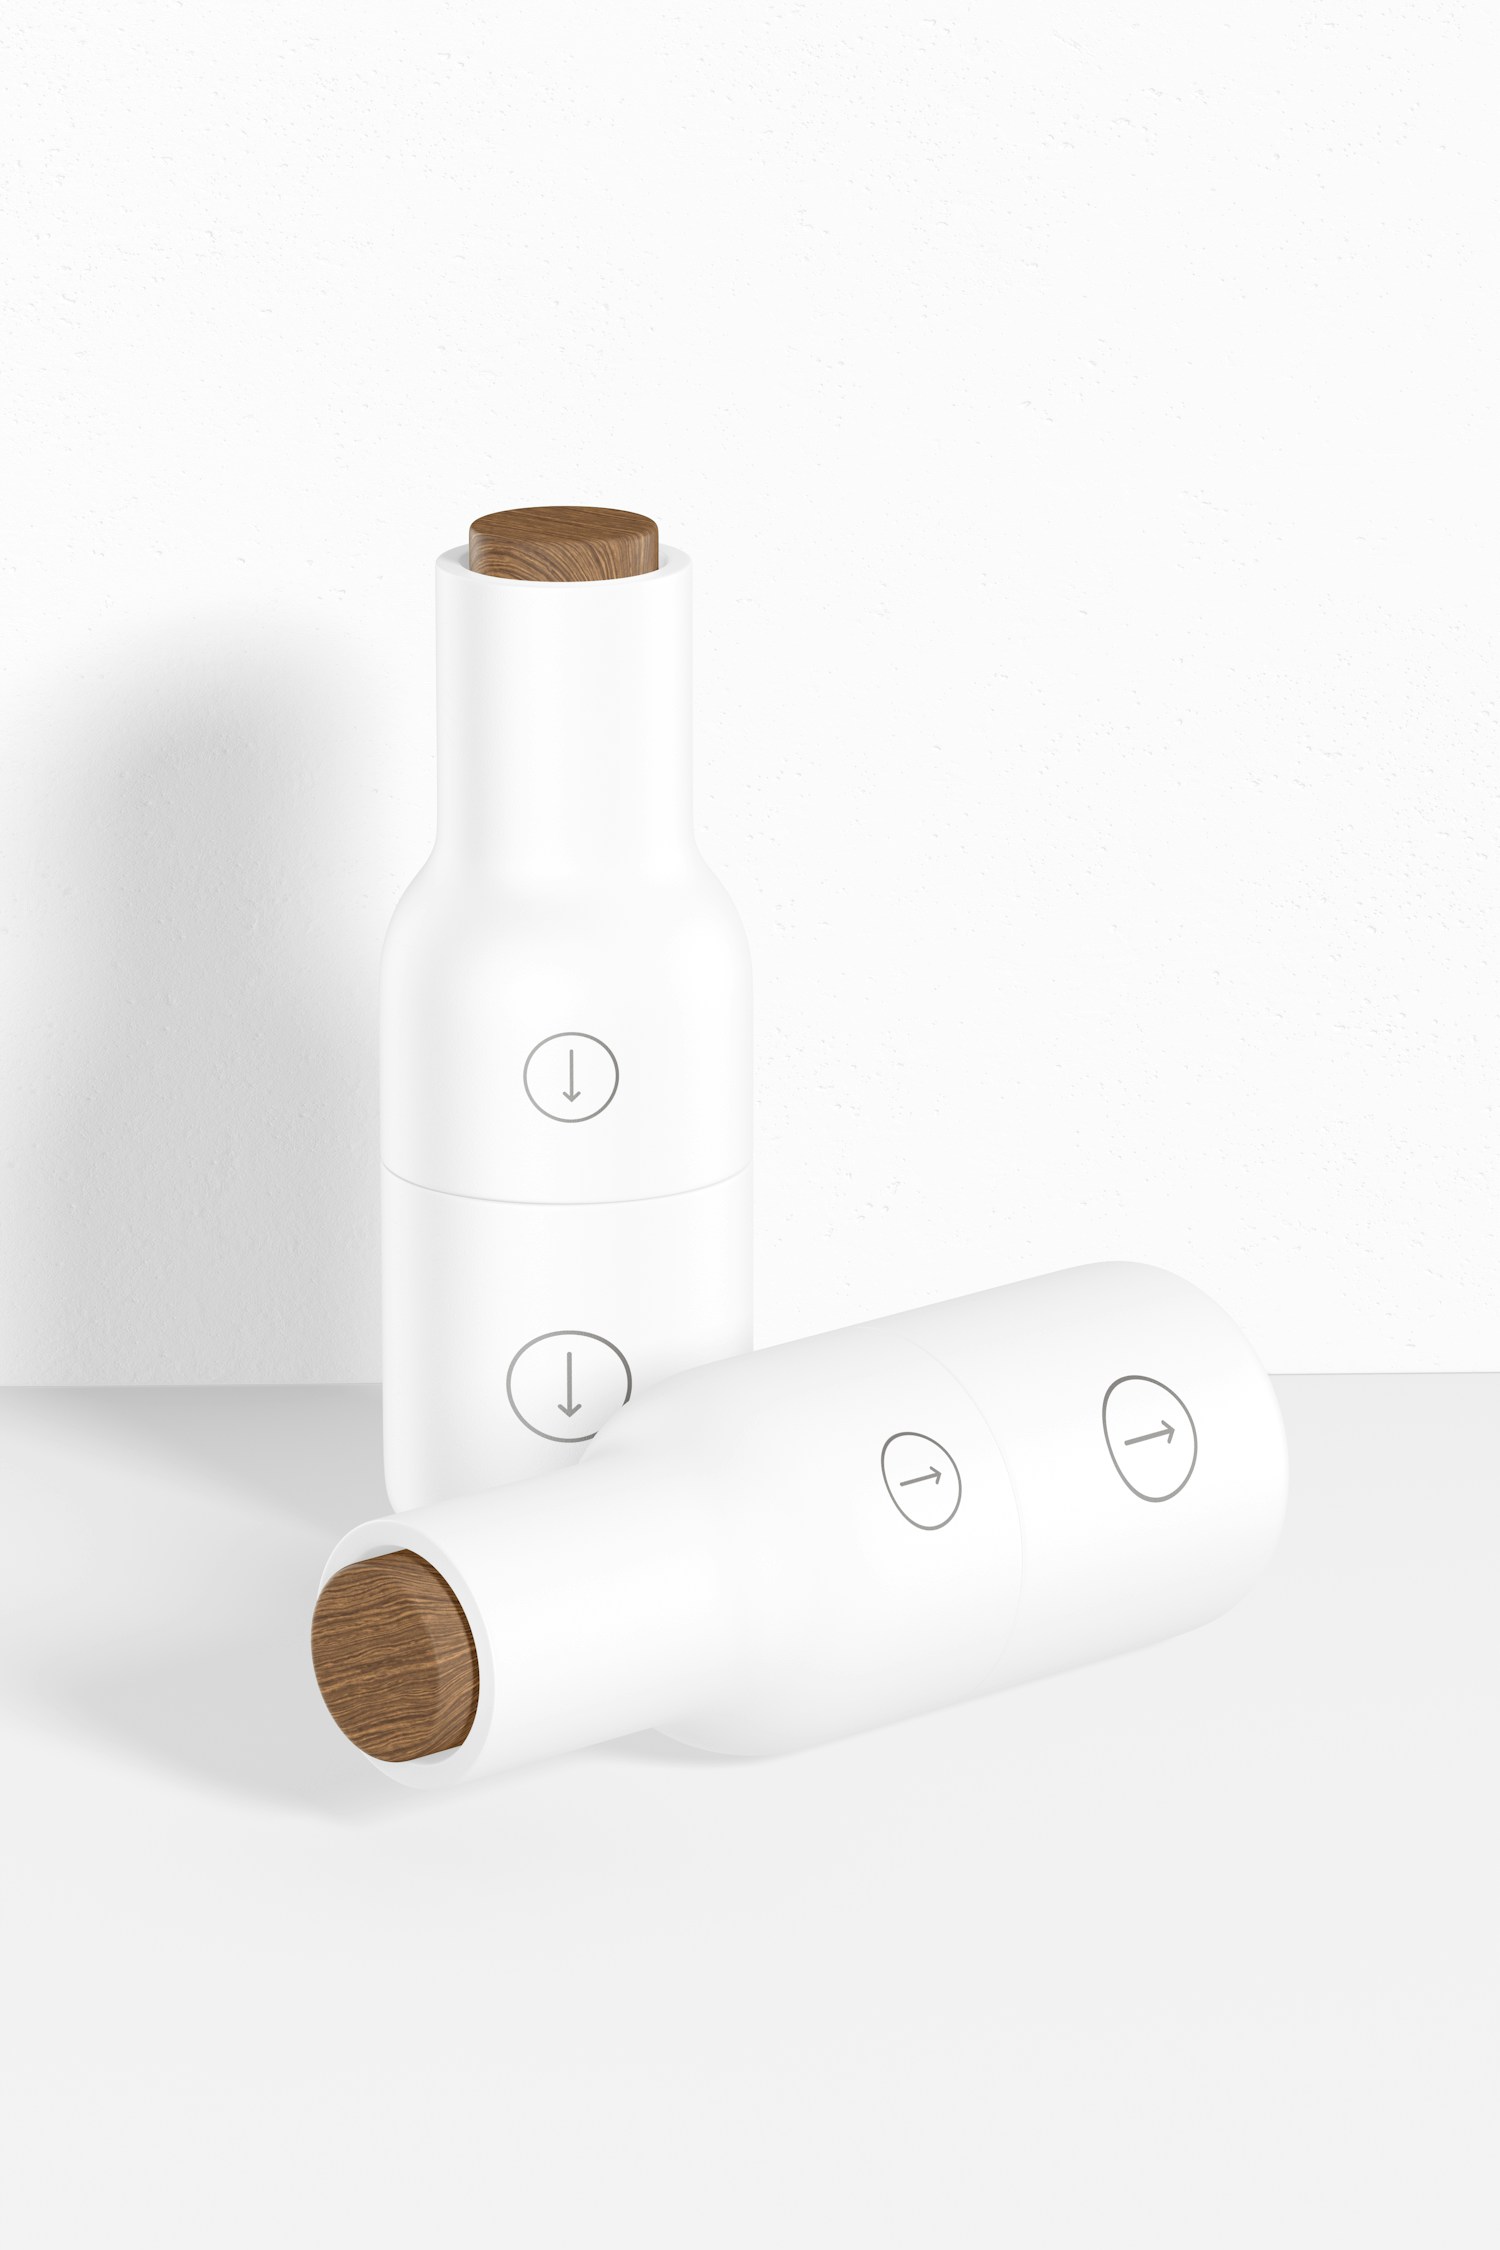 Salt and Pepper Grinder Mockup, Standing and Dropped